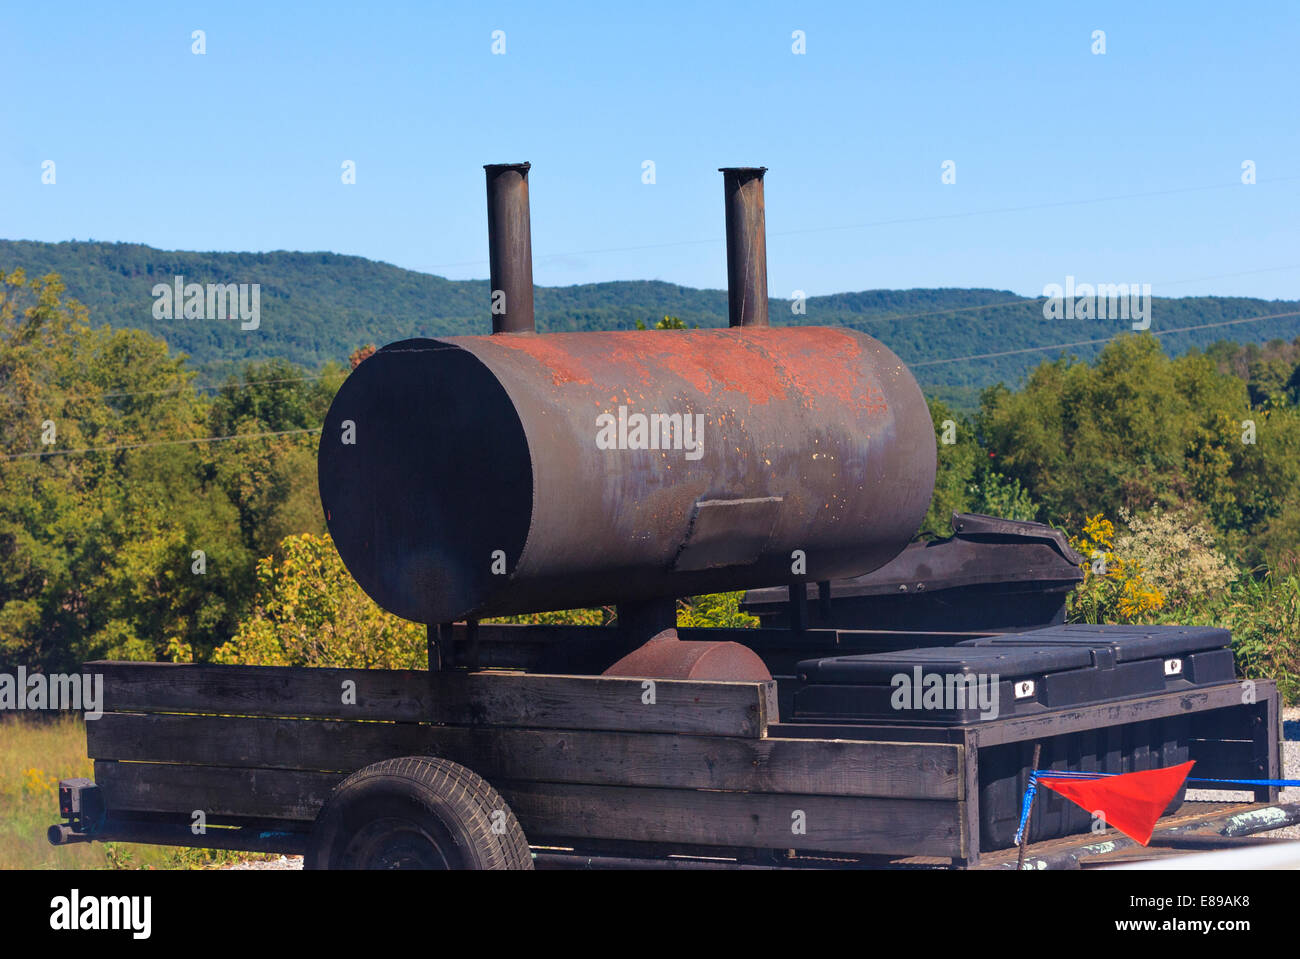 BBQ smoker mobile trailer mounted at roadside Tennessee BBQ stand Stock Photo